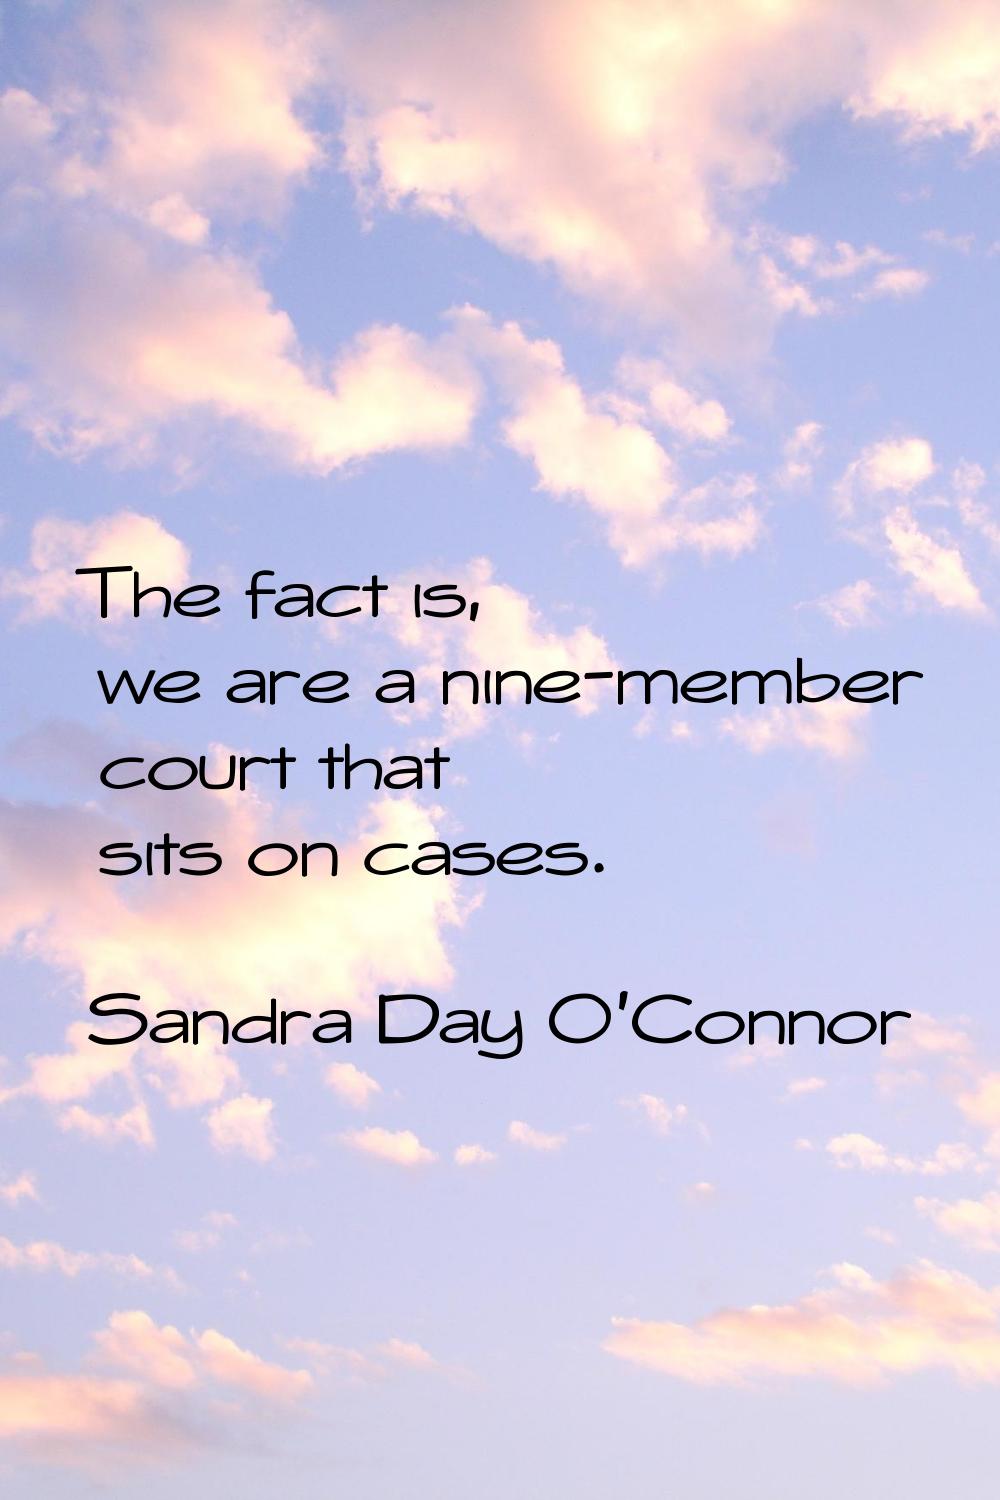 The fact is, we are a nine-member court that sits on cases.